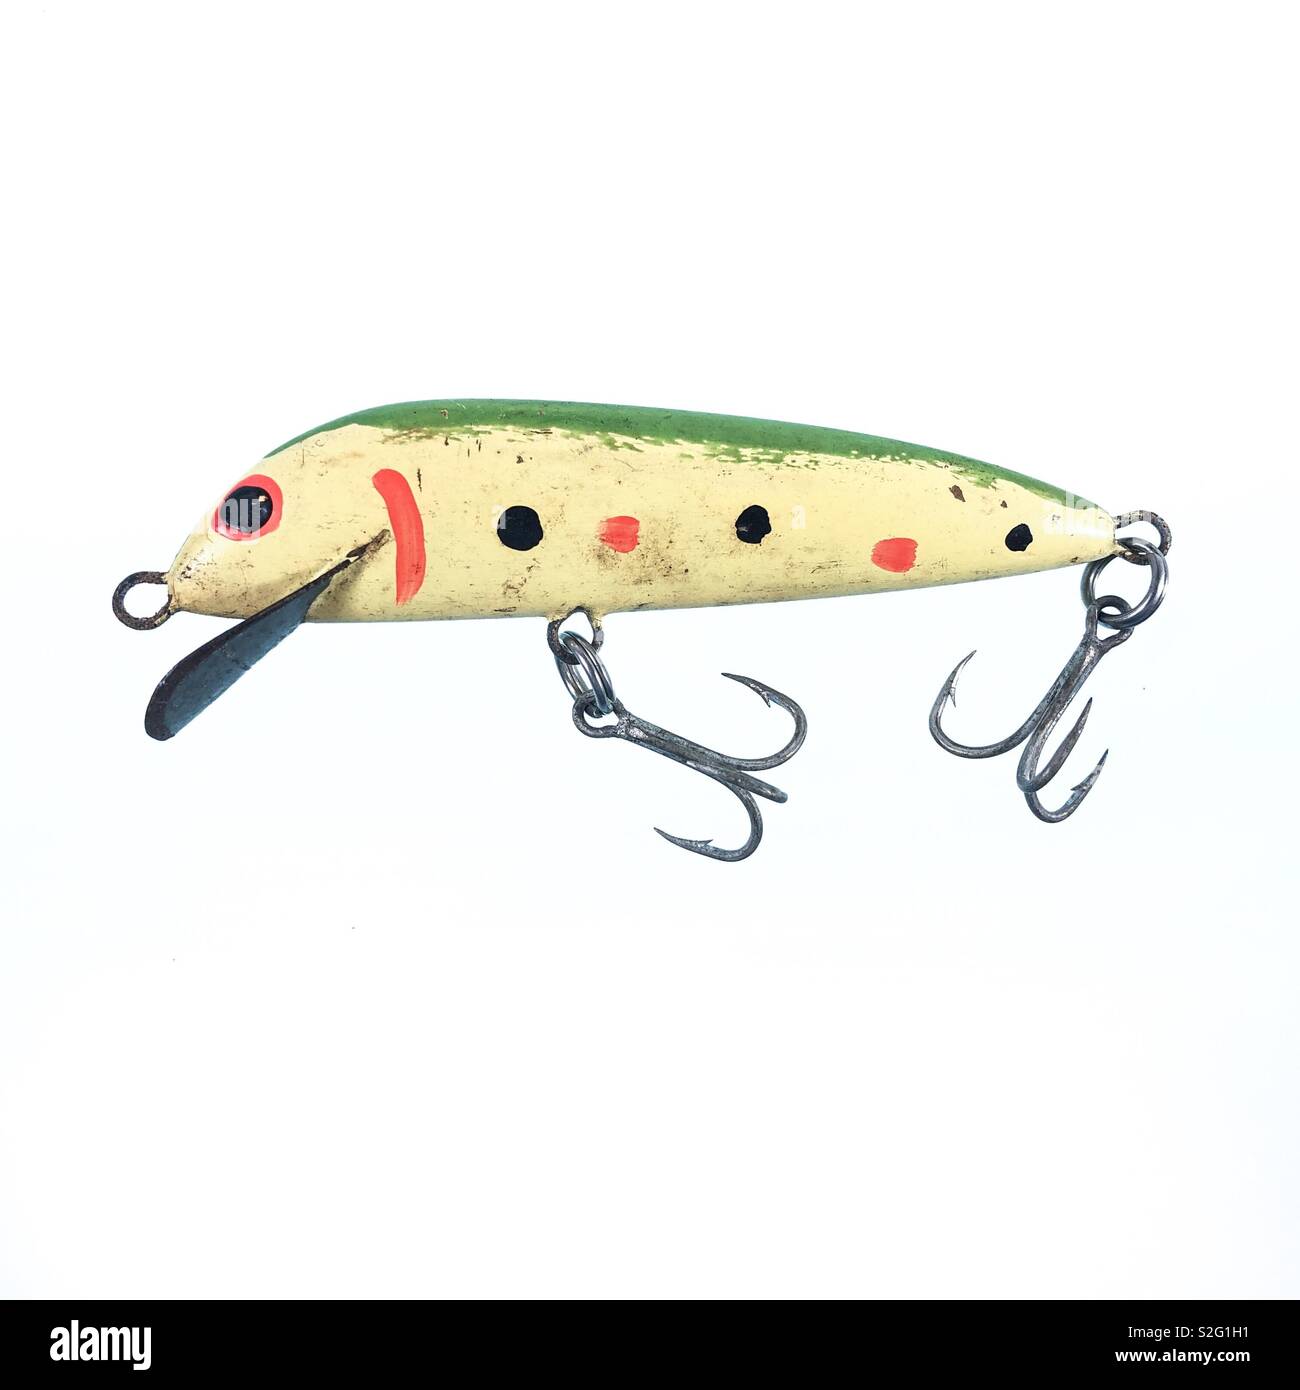 Handmade timber fishing lure from the 1960s, made in Australia